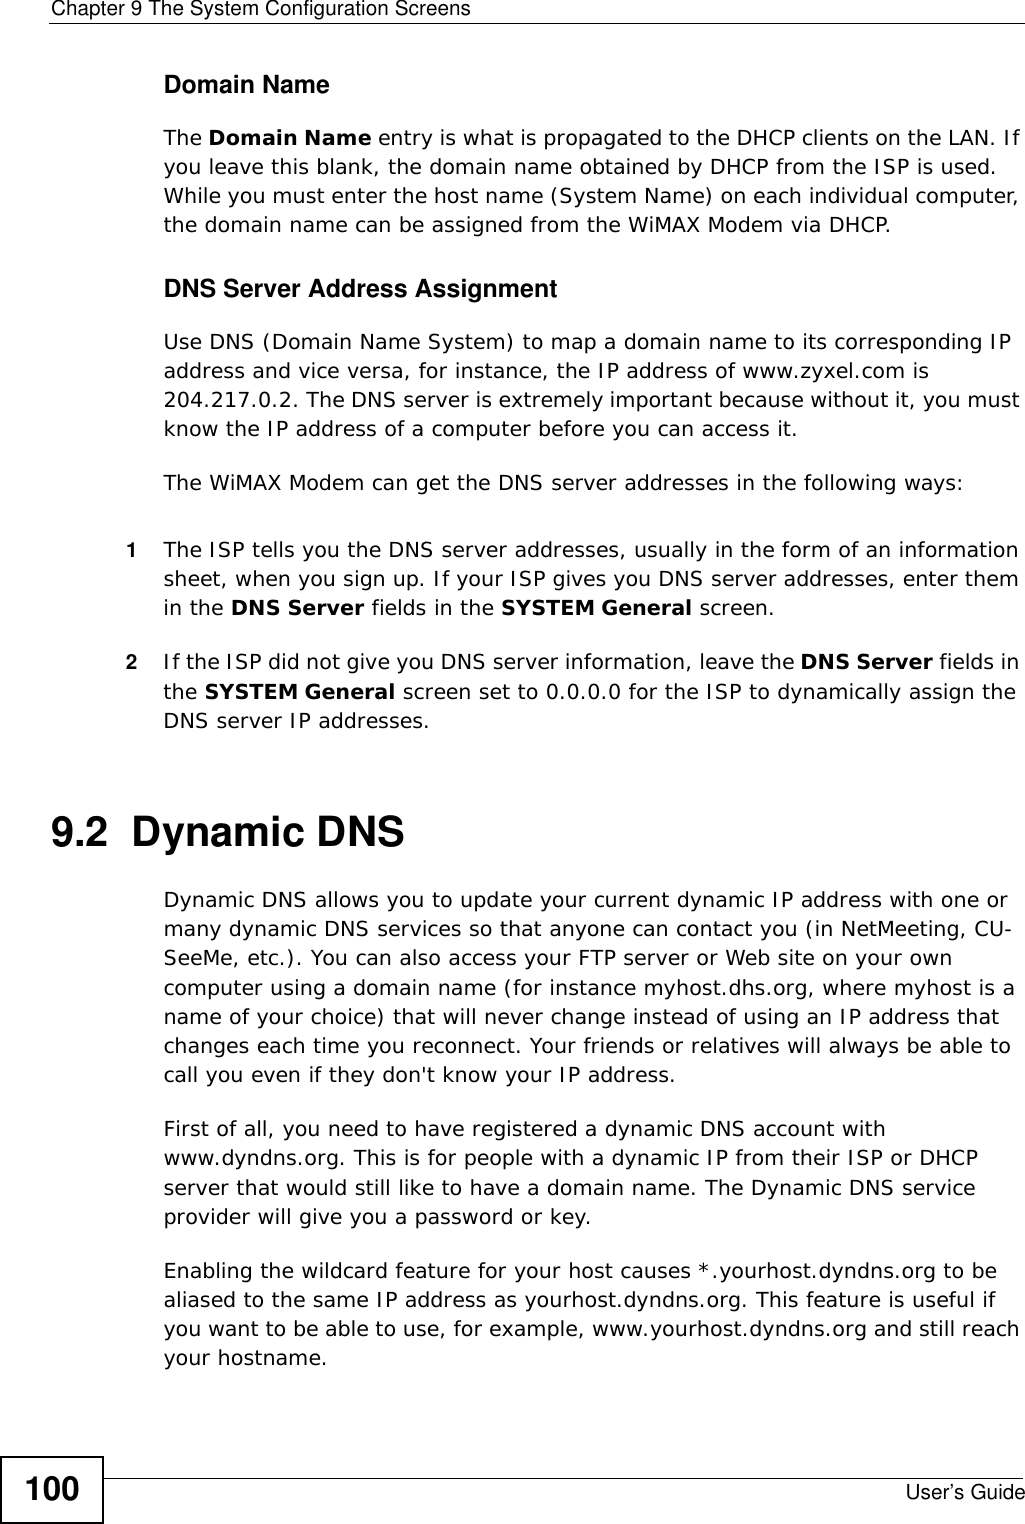 Chapter 9 The System Configuration ScreensUser’s Guide100Domain NameThe Domain Name entry is what is propagated to the DHCP clients on the LAN. If you leave this blank, the domain name obtained by DHCP from the ISP is used. While you must enter the host name (System Name) on each individual computer, the domain name can be assigned from the WiMAX Modem via DHCP.DNS Server Address AssignmentUse DNS (Domain Name System) to map a domain name to its corresponding IP address and vice versa, for instance, the IP address of www.zyxel.com is 204.217.0.2. The DNS server is extremely important because without it, you must know the IP address of a computer before you can access it. The WiMAX Modem can get the DNS server addresses in the following ways:1The ISP tells you the DNS server addresses, usually in the form of an information sheet, when you sign up. If your ISP gives you DNS server addresses, enter them in the DNS Server fields in the SYSTEM General screen.2If the ISP did not give you DNS server information, leave the DNS Server fields in the SYSTEM General screen set to 0.0.0.0 for the ISP to dynamically assign the DNS server IP addresses.9.2  Dynamic DNSDynamic DNS allows you to update your current dynamic IP address with one or many dynamic DNS services so that anyone can contact you (in NetMeeting, CU-SeeMe, etc.). You can also access your FTP server or Web site on your own computer using a domain name (for instance myhost.dhs.org, where myhost is a name of your choice) that will never change instead of using an IP address that changes each time you reconnect. Your friends or relatives will always be able to call you even if they don&apos;t know your IP address.First of all, you need to have registered a dynamic DNS account with www.dyndns.org. This is for people with a dynamic IP from their ISP or DHCP server that would still like to have a domain name. The Dynamic DNS service provider will give you a password or key.Enabling the wildcard feature for your host causes *.yourhost.dyndns.org to be aliased to the same IP address as yourhost.dyndns.org. This feature is useful if you want to be able to use, for example, www.yourhost.dyndns.org and still reach your hostname.